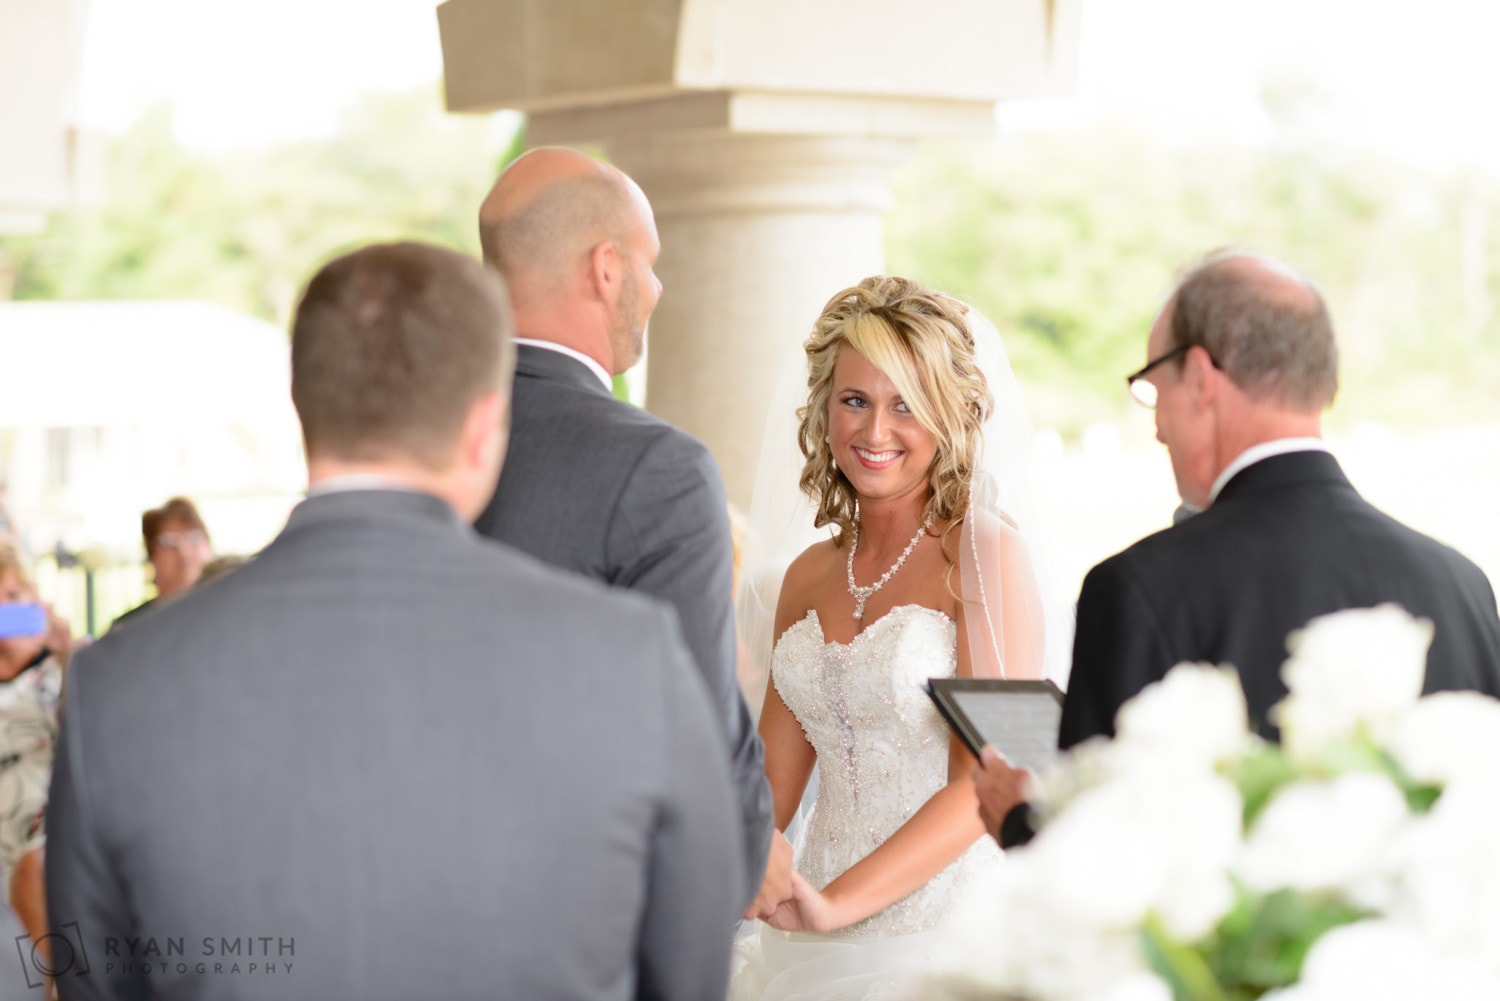 Bride smiling during the ceremony - Members Club at Grande Dunes